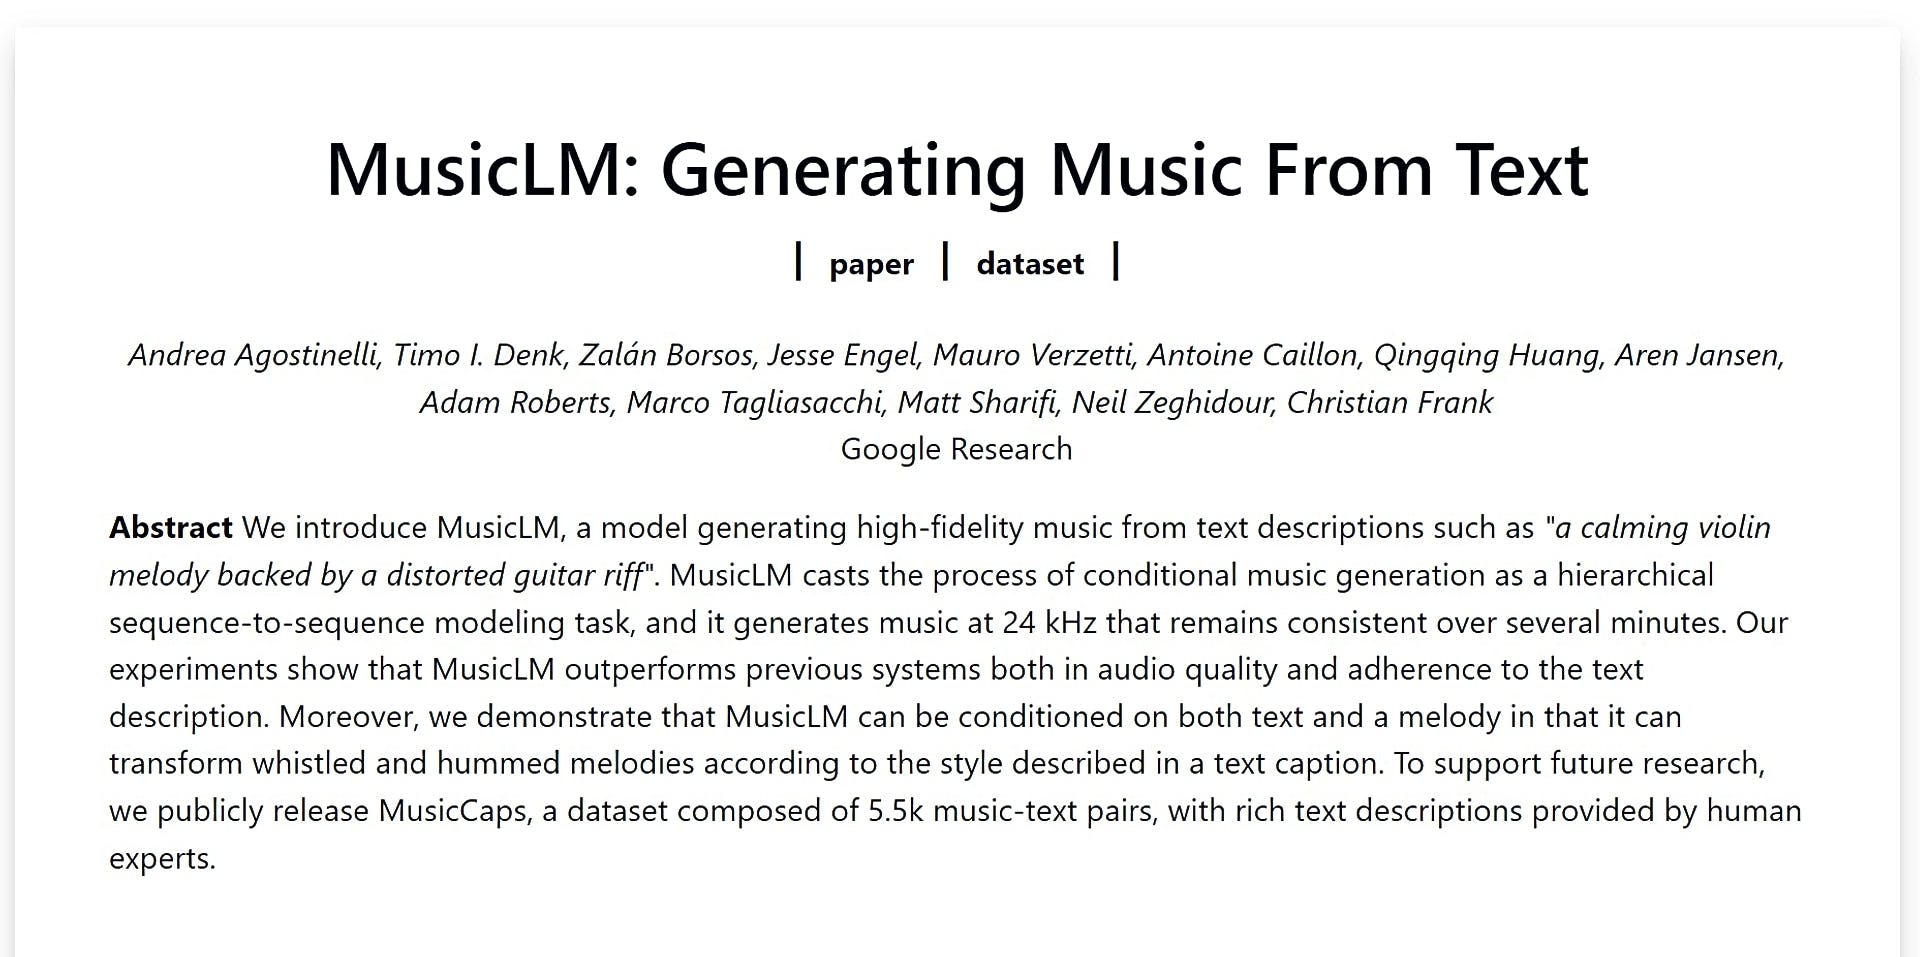 MusicLM featured